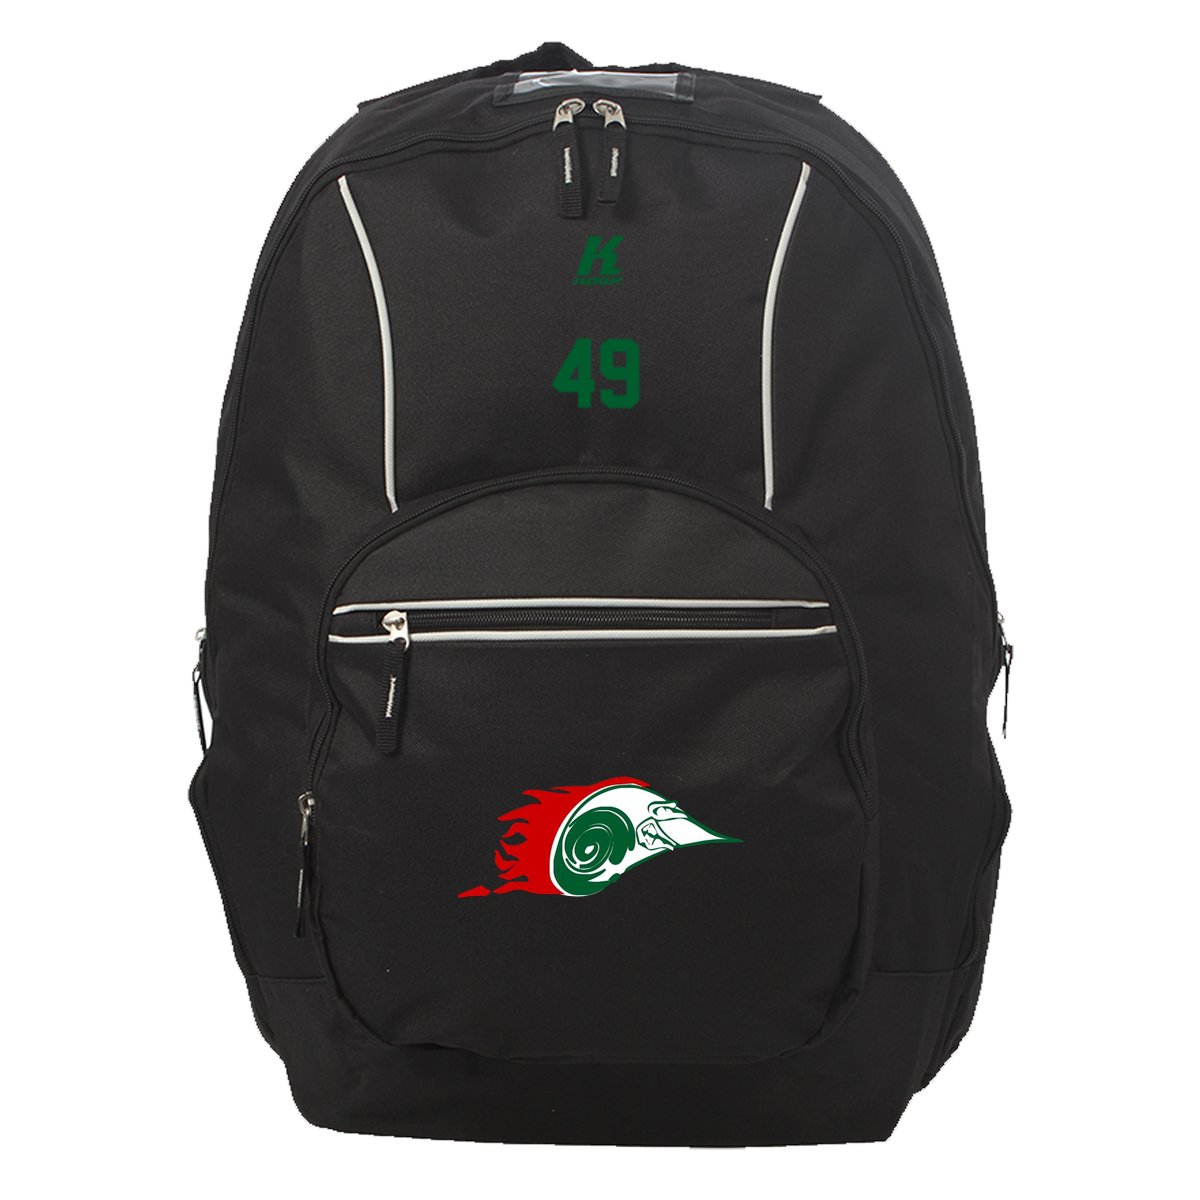 X-Press Heritage Backpack with Playernumber or Initials